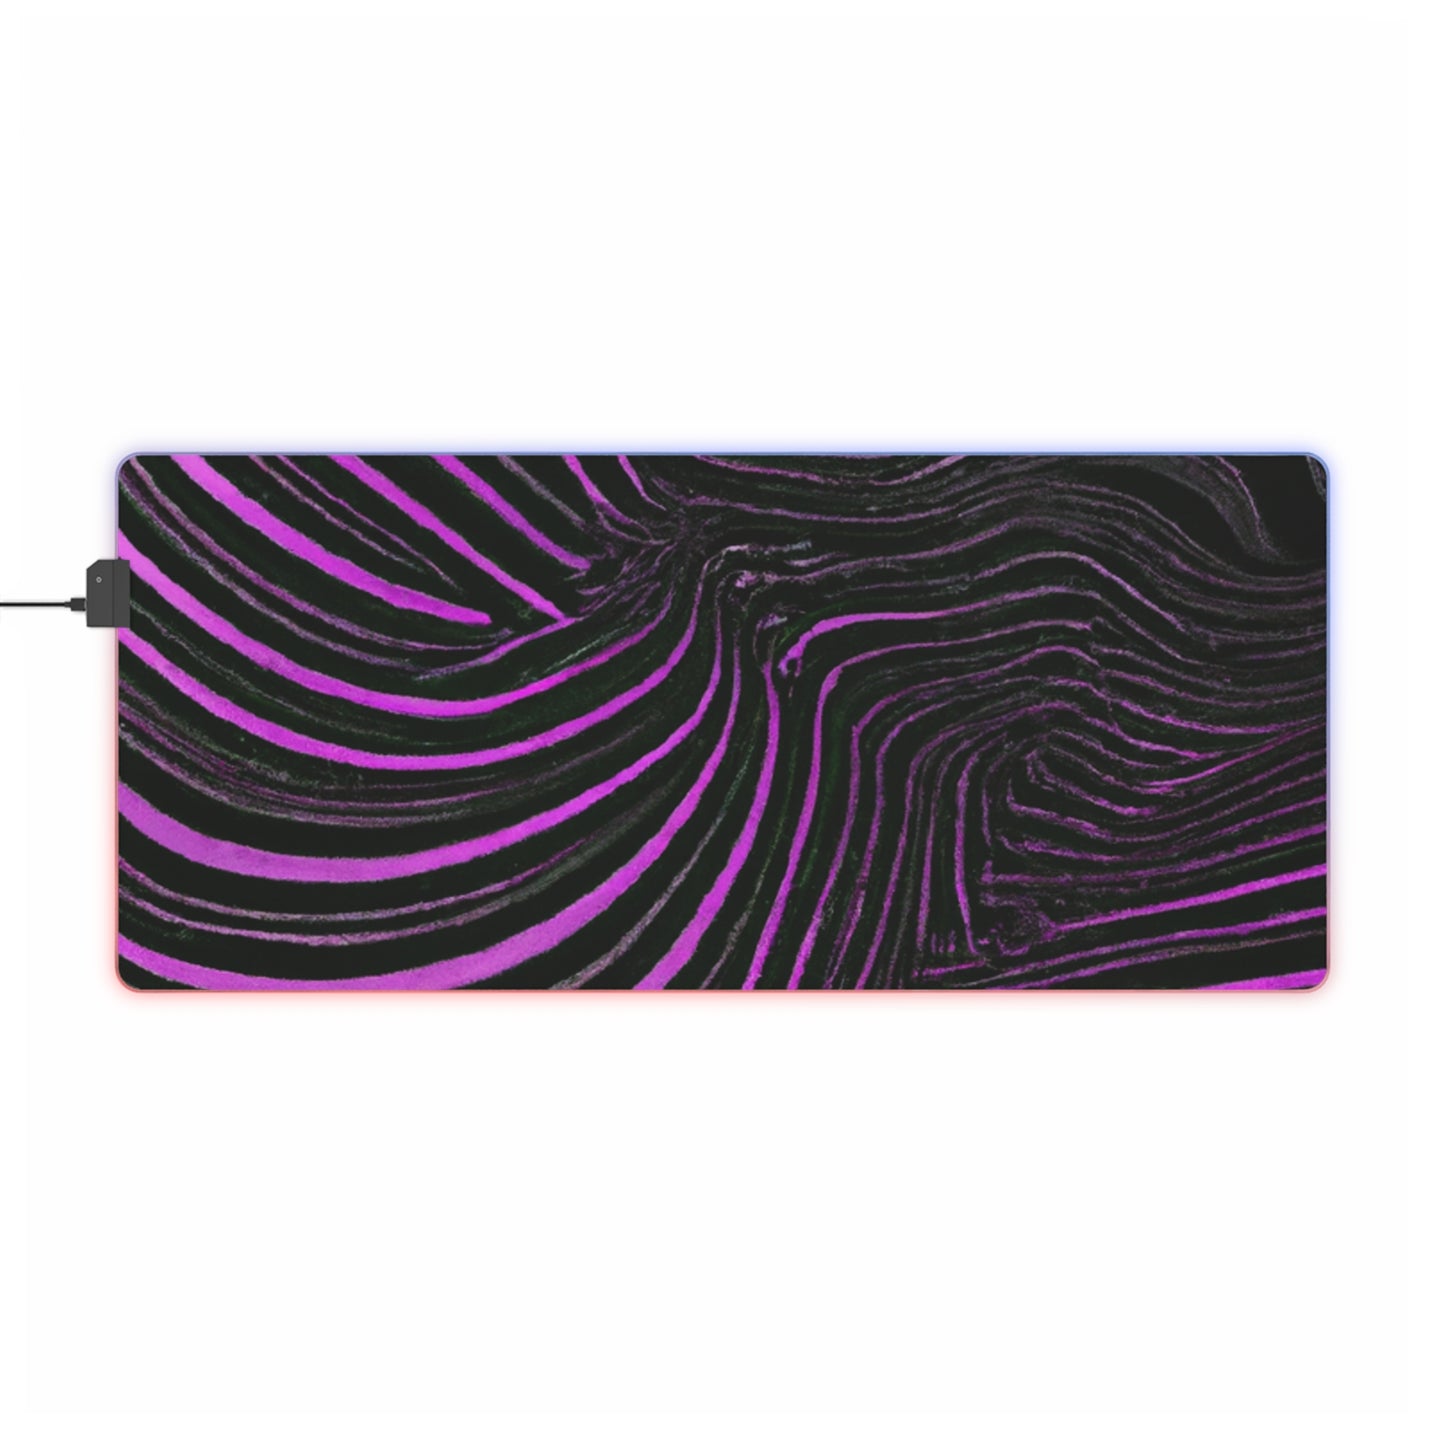 Sally Spacewalker - Psychedelic Trippy LED Light Up Gaming Mouse Pad